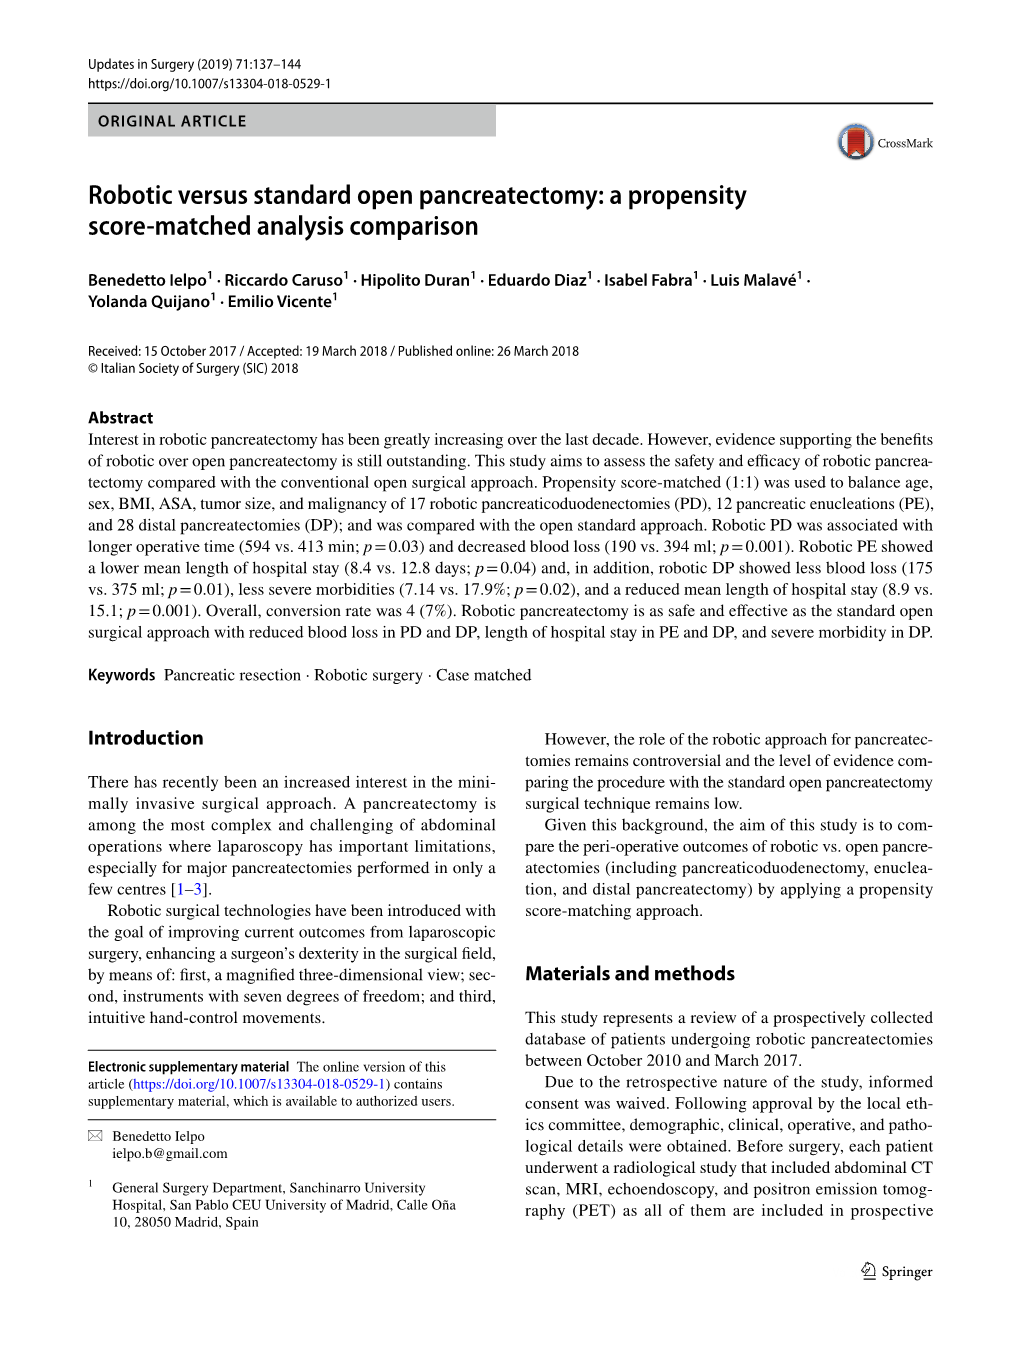 Robotic Versus Standard Open Pancreatectomy: a Propensity Score‑Matched Analysis Comparison